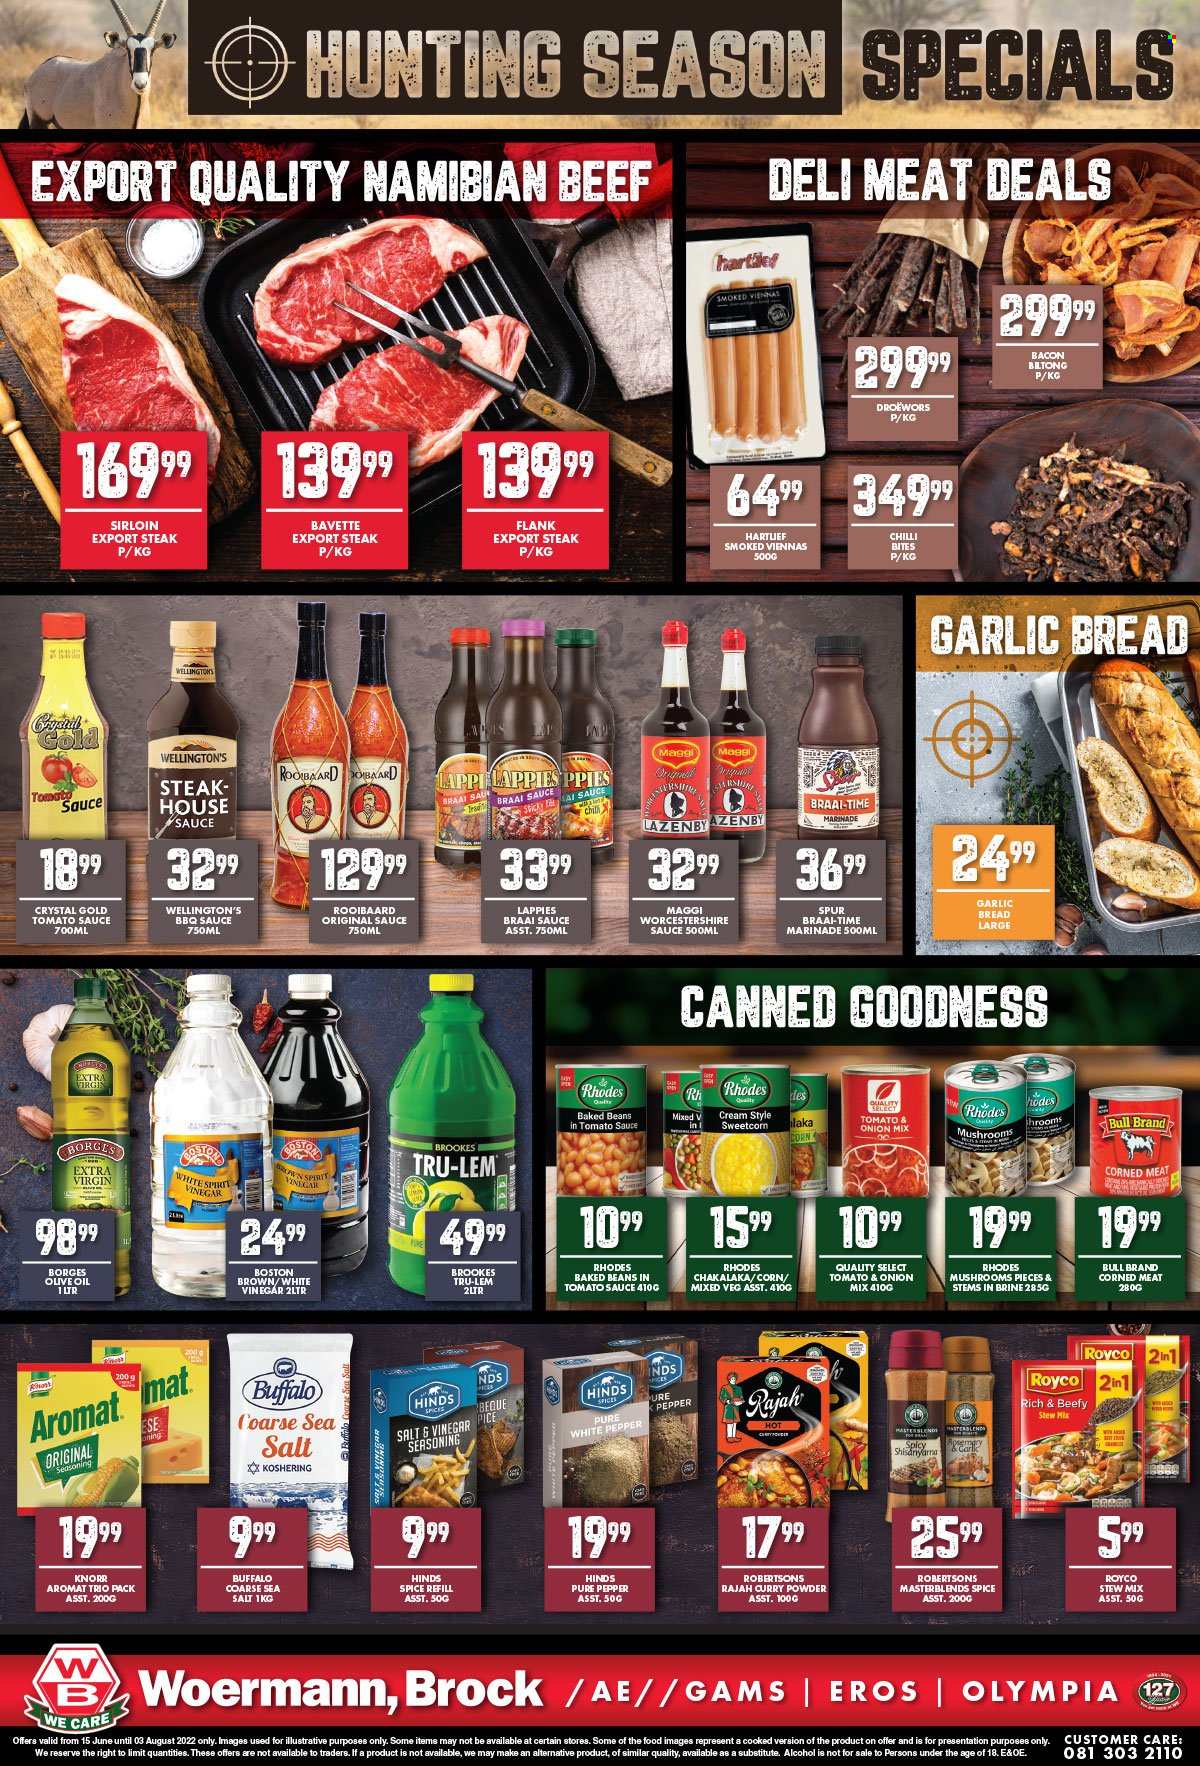 Woermann Brock catalogue  - 15/06/2022 - 03/08/2022 - Sales products - mushroom, bread, beans, corn, Knorr, chakalaka, bacon, vienna sausage, Maggi, sea salt, corned meat, baked beans, Borges, spice, curry powder, Hinds, barbecue sauce, worcestershire sauce, marinade, extra virgin olive oil, vinegar, olive oil, oil, alcohol, steak, Brut. Page 2.